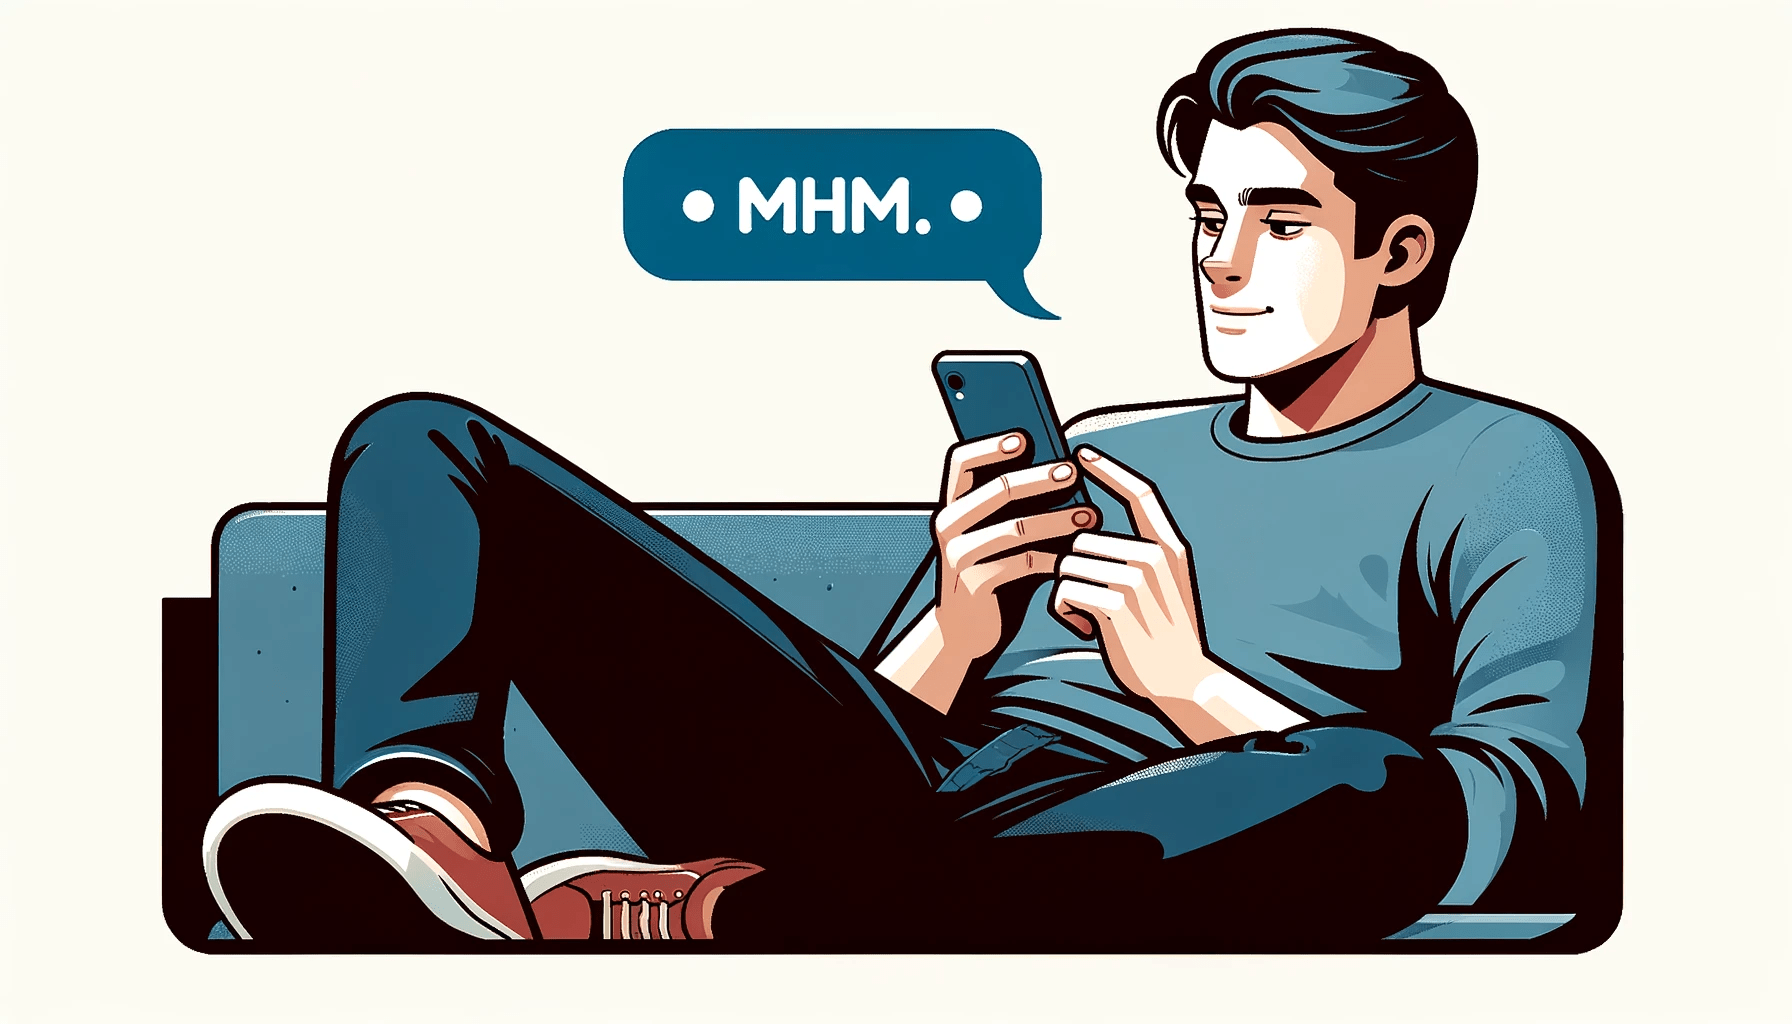 Young man texting Mhm to a girl